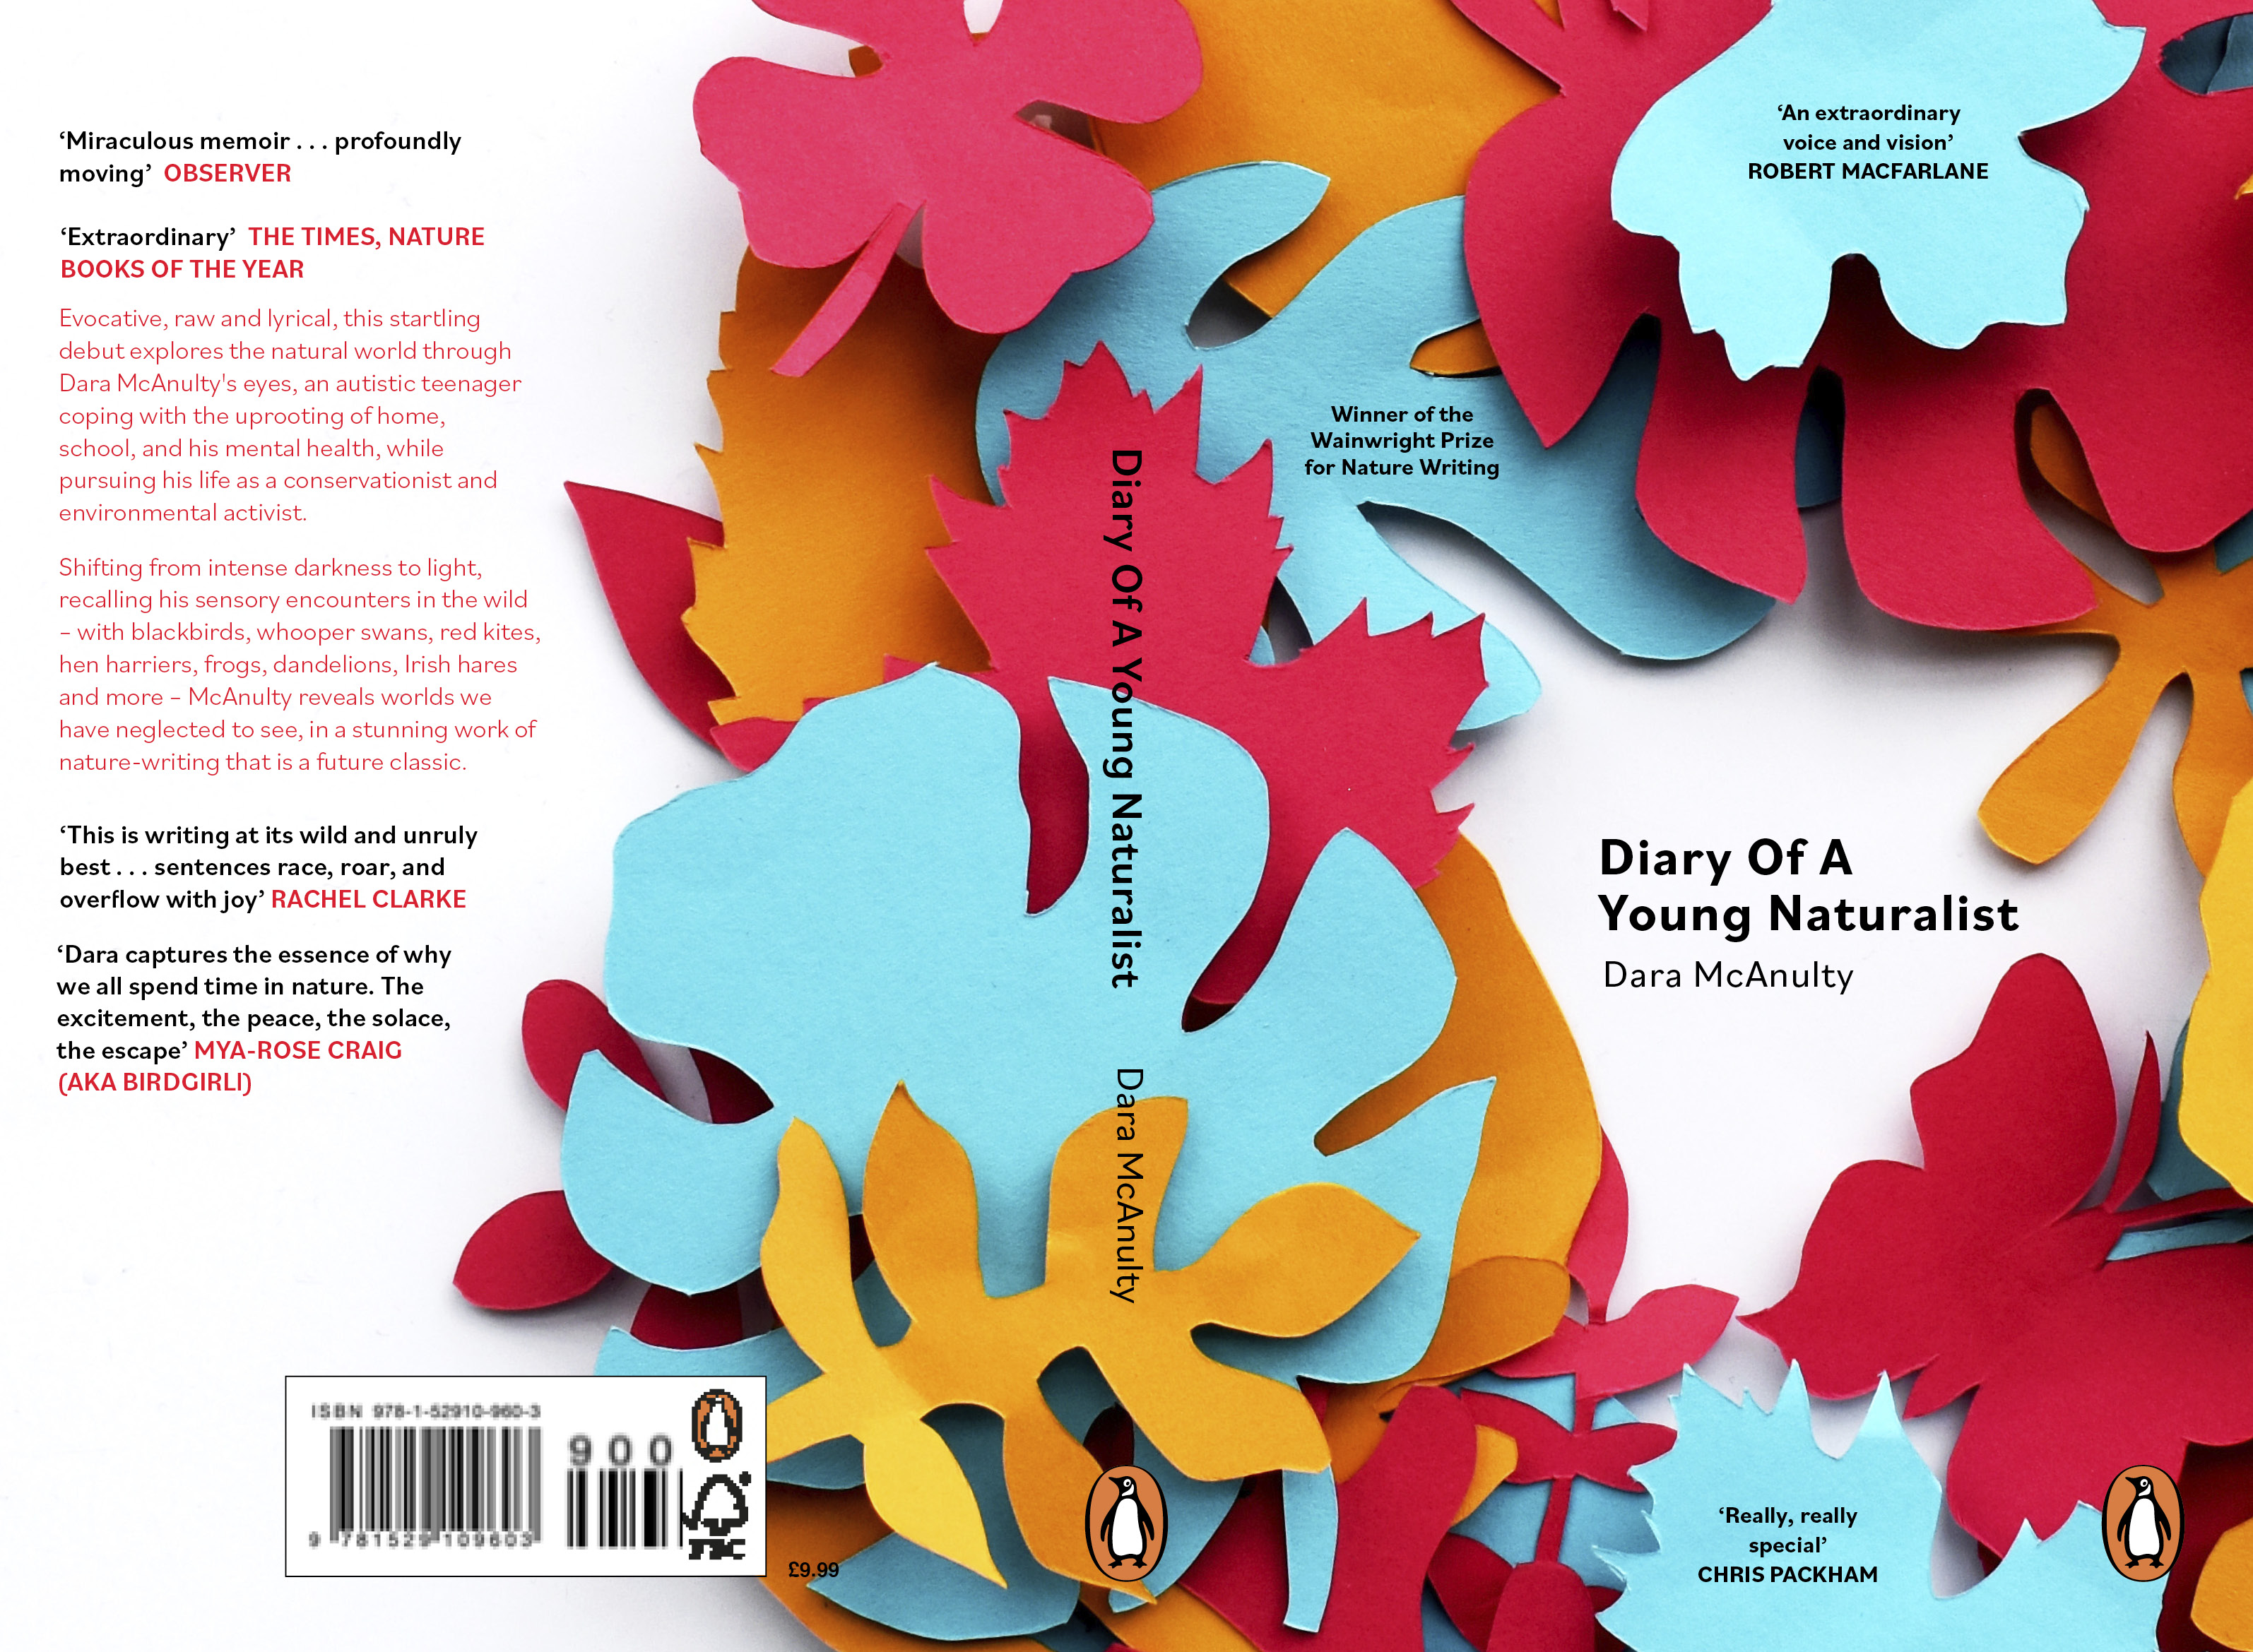 Ella Hunter's cover design of 'Diary of a Young Naturalist'